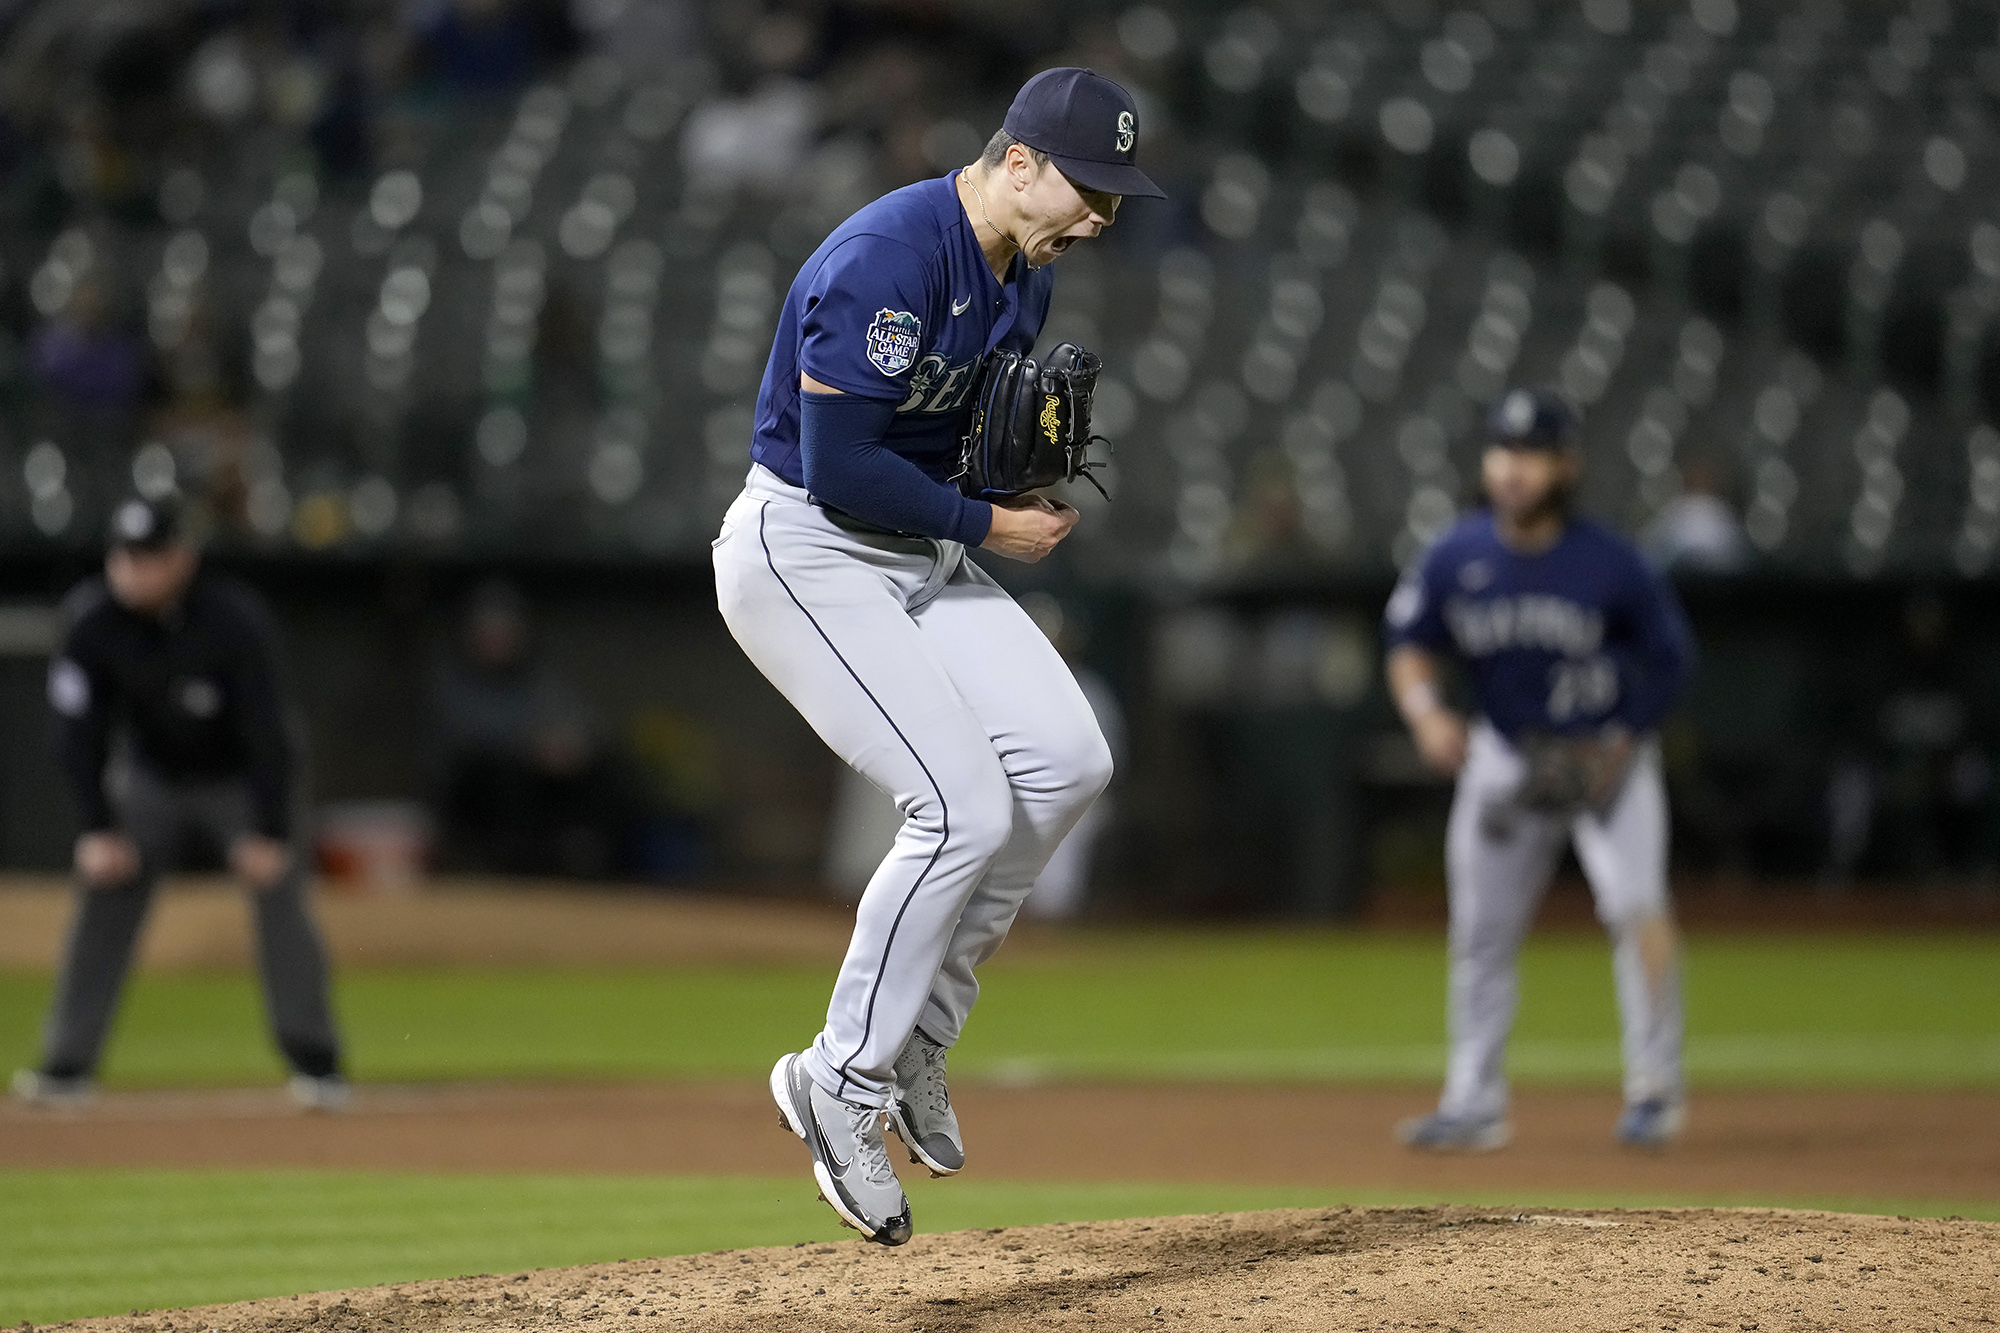 Mariners wrapping up most successful season, with playoffs in store